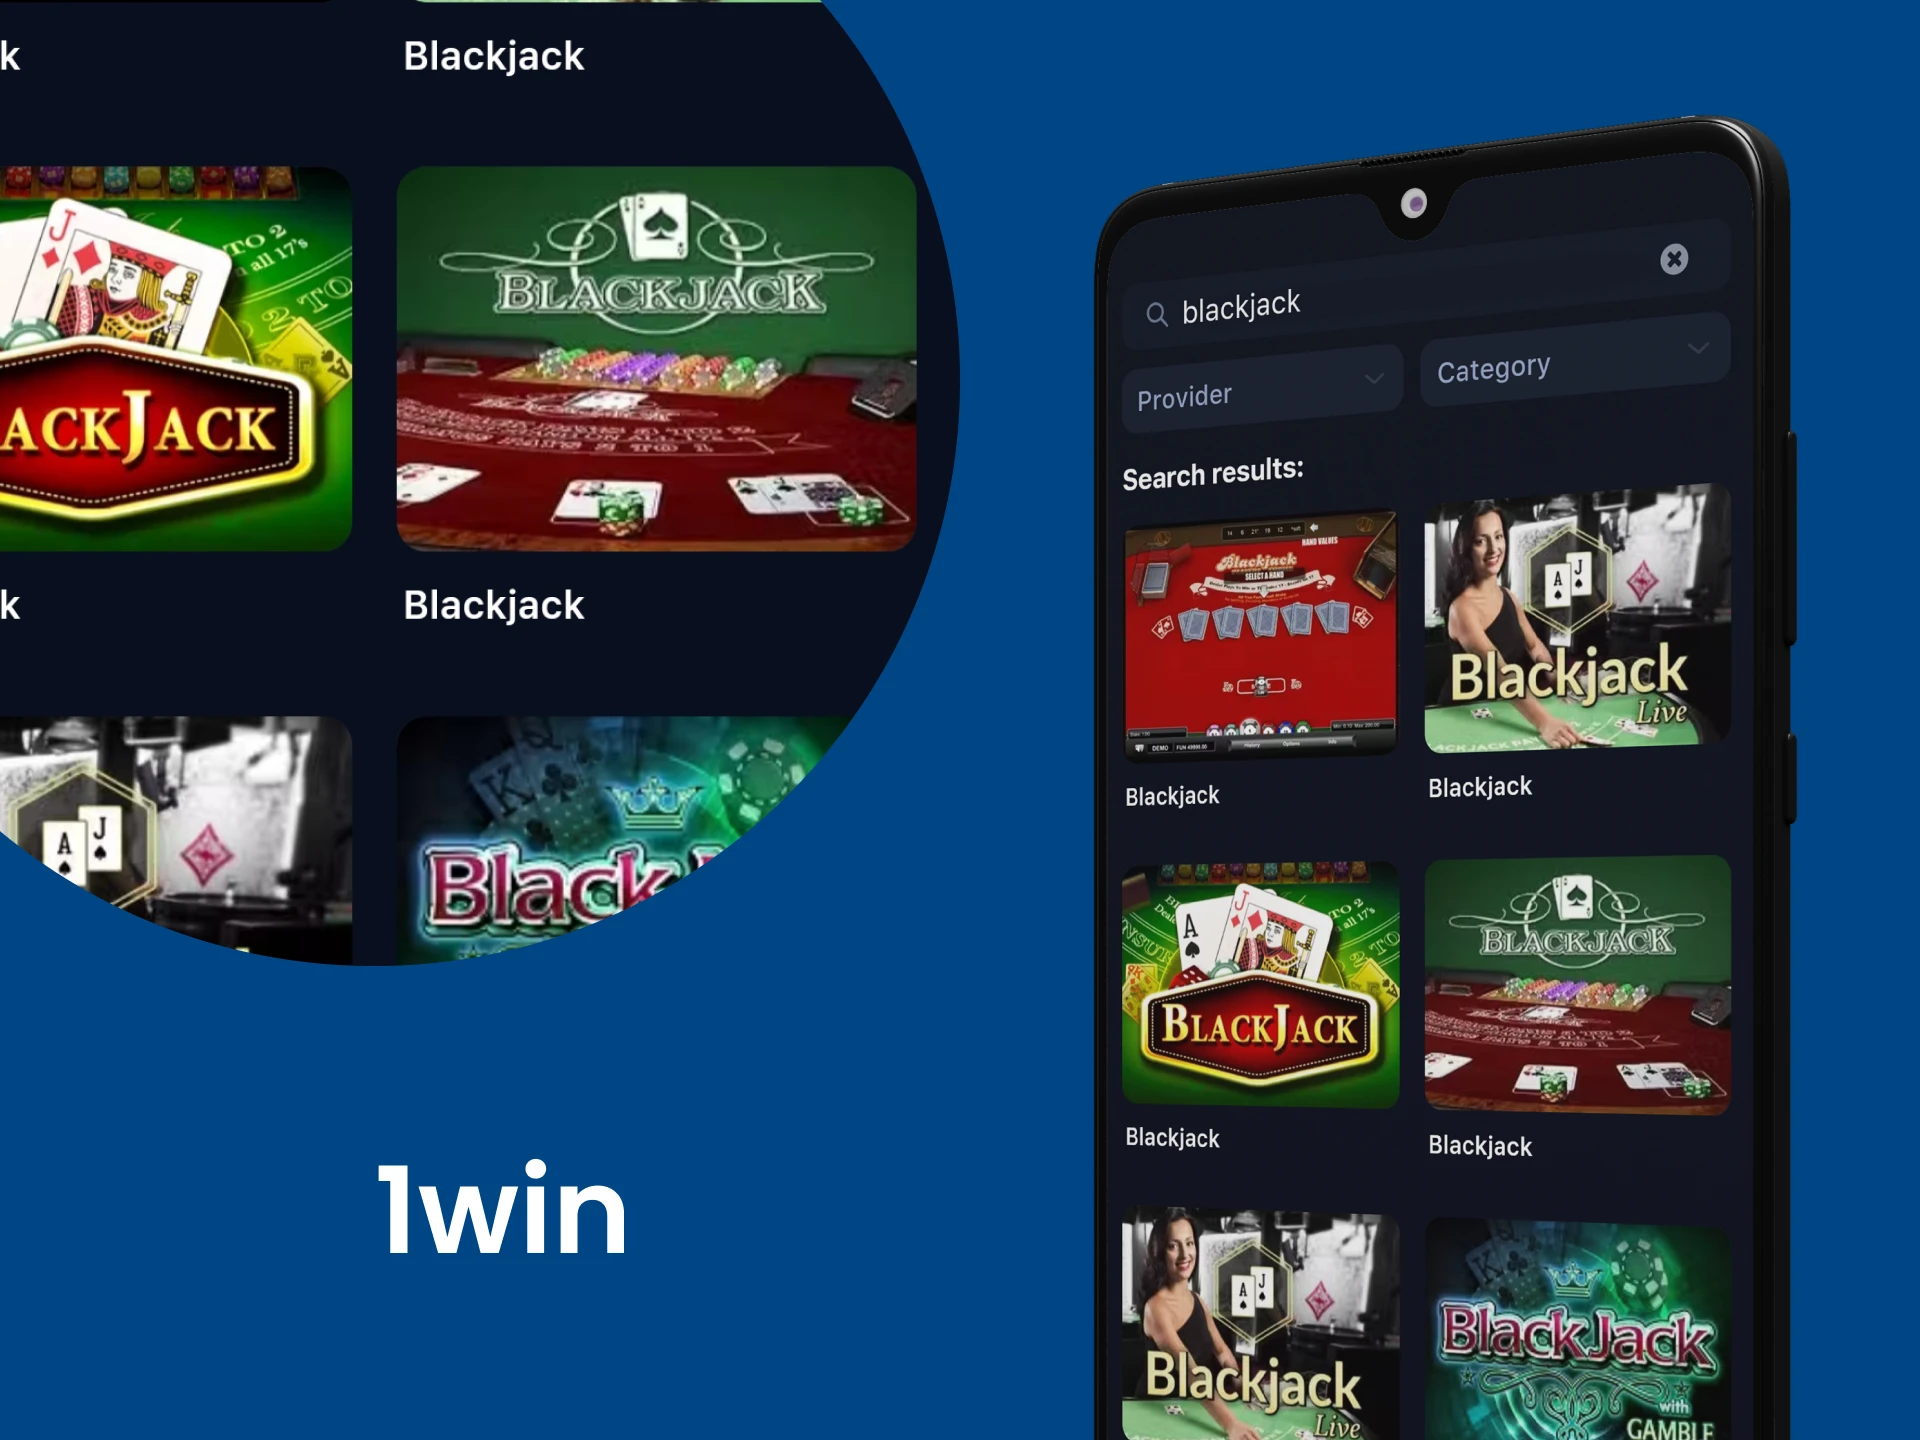 Play BlackJack on your smartphone using the 1win app.